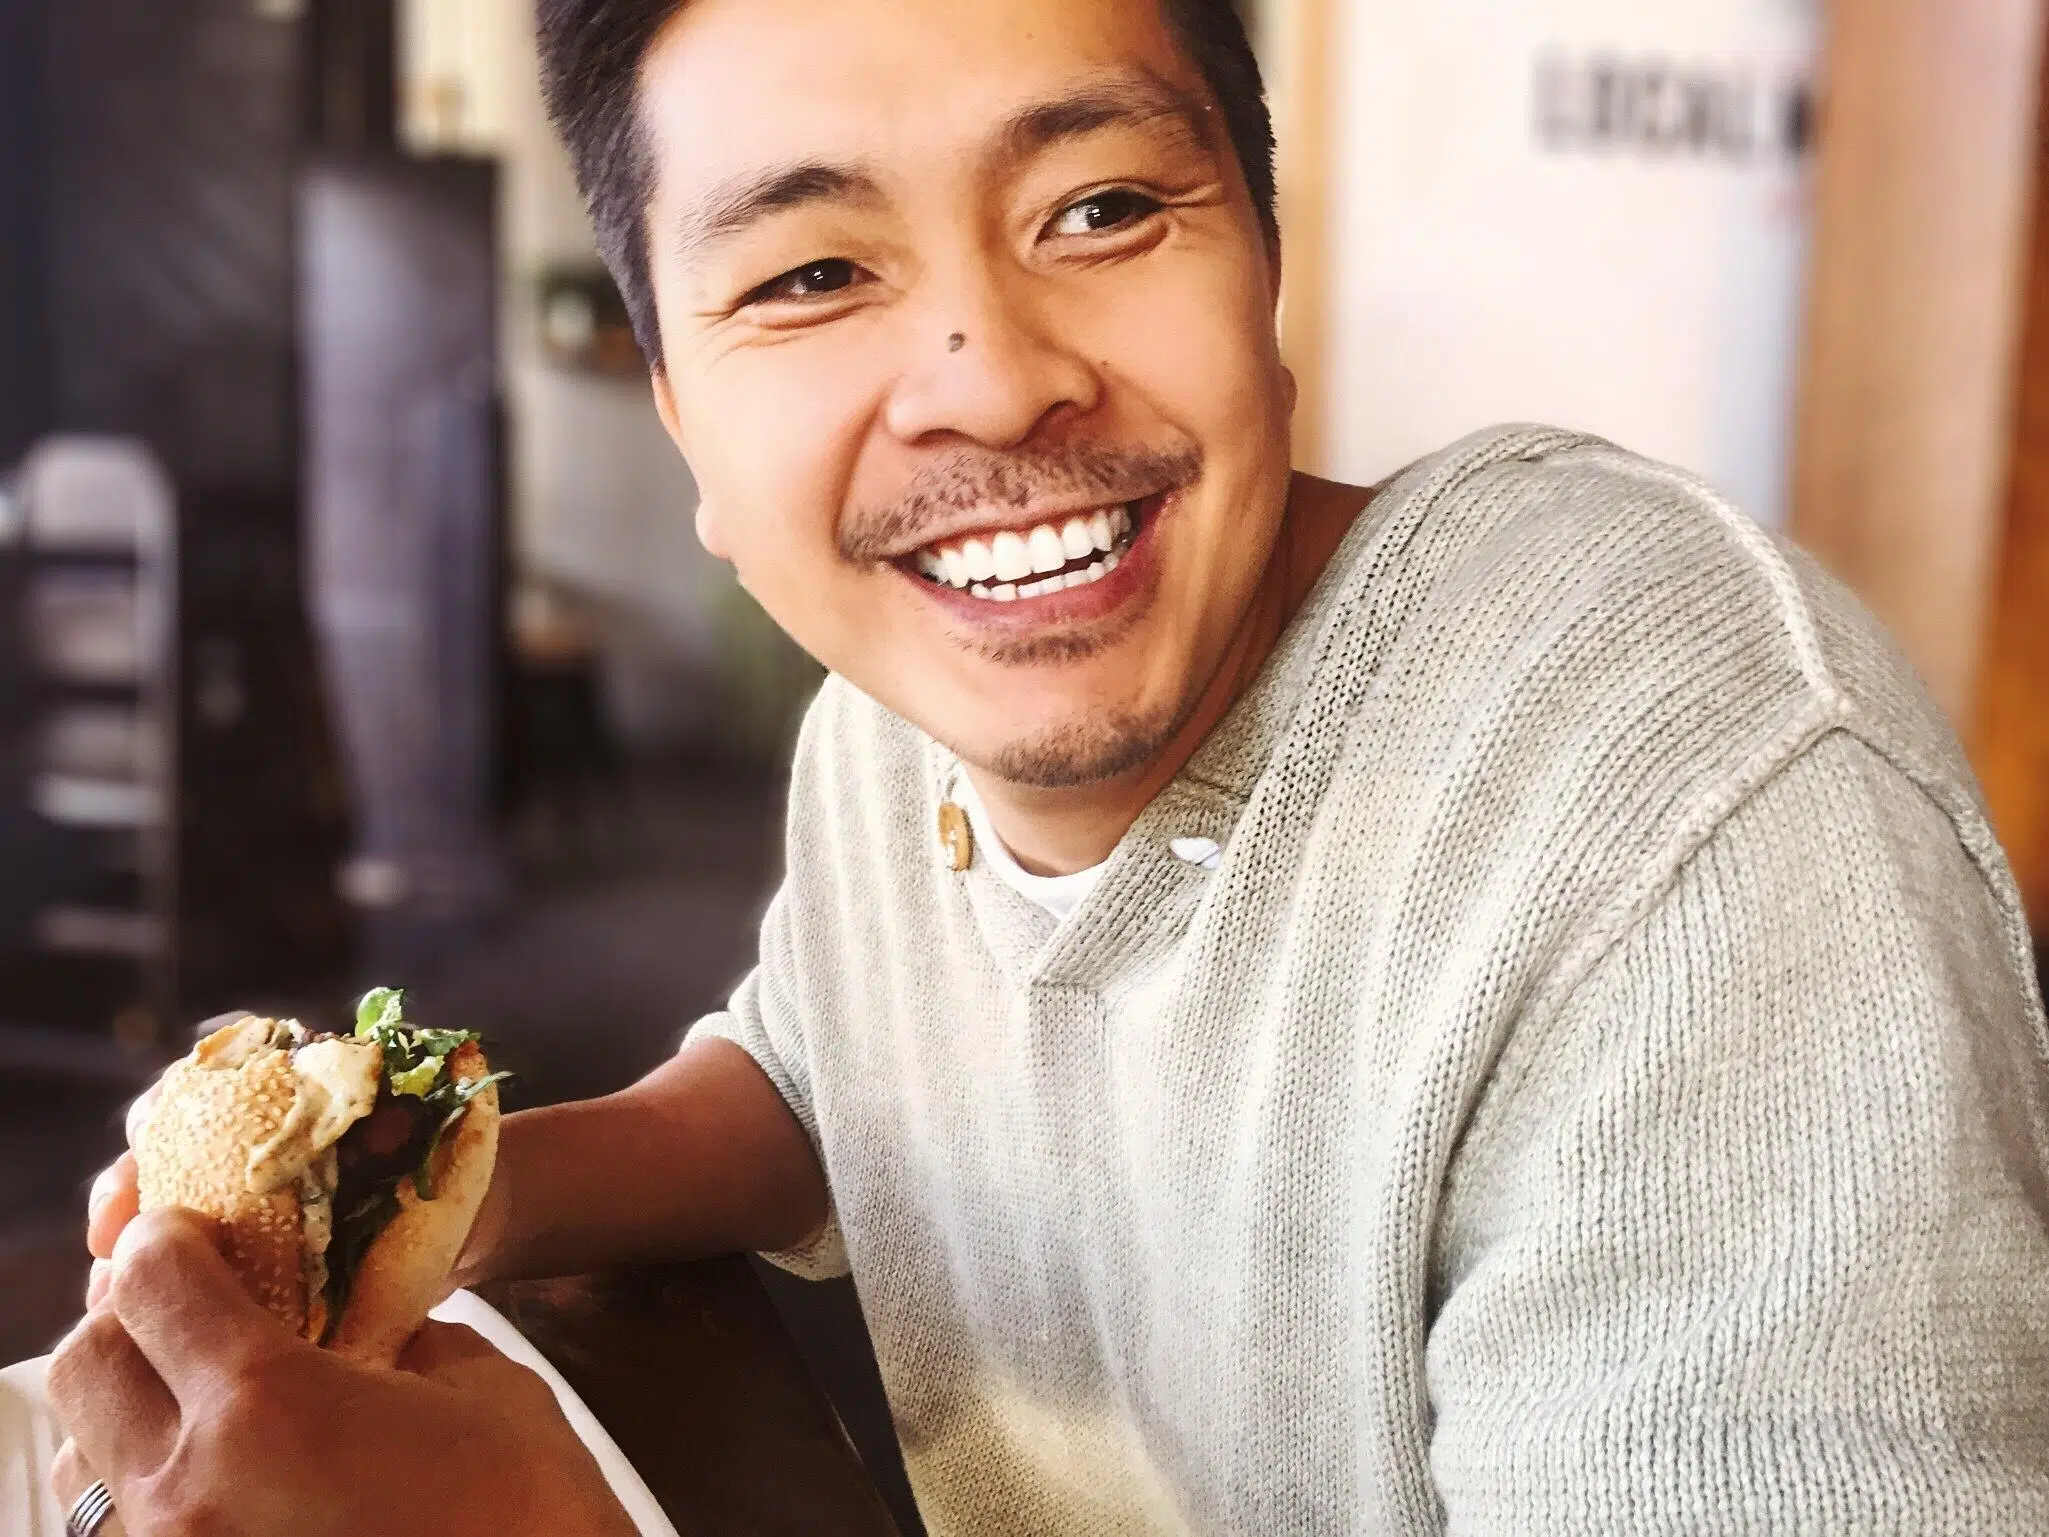 Man smiles whilst holding food